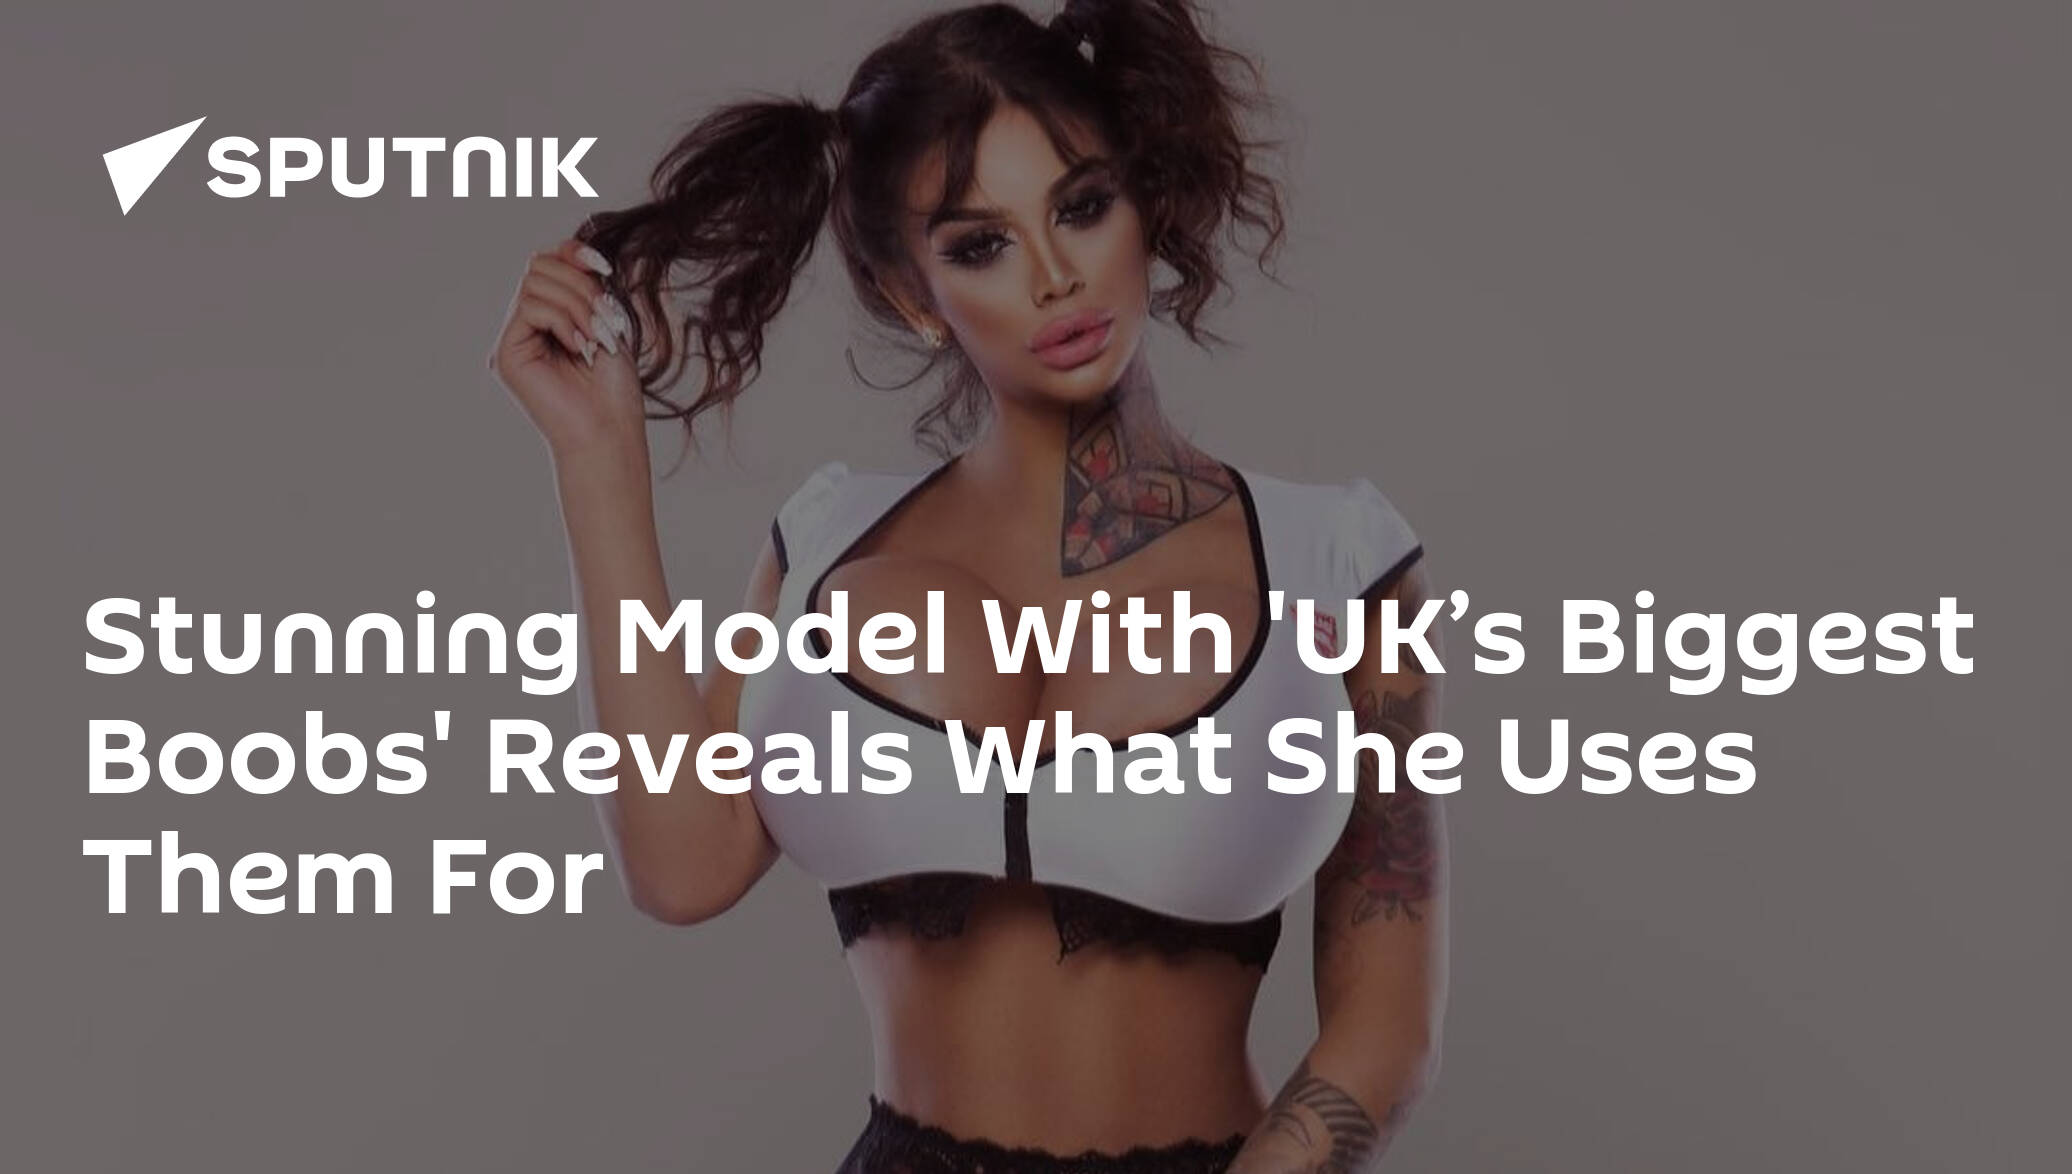 Stunning Model With 'UK's Biggest Boobs' Reveals What She Uses Them For -  23.08.2018, Sputnik International